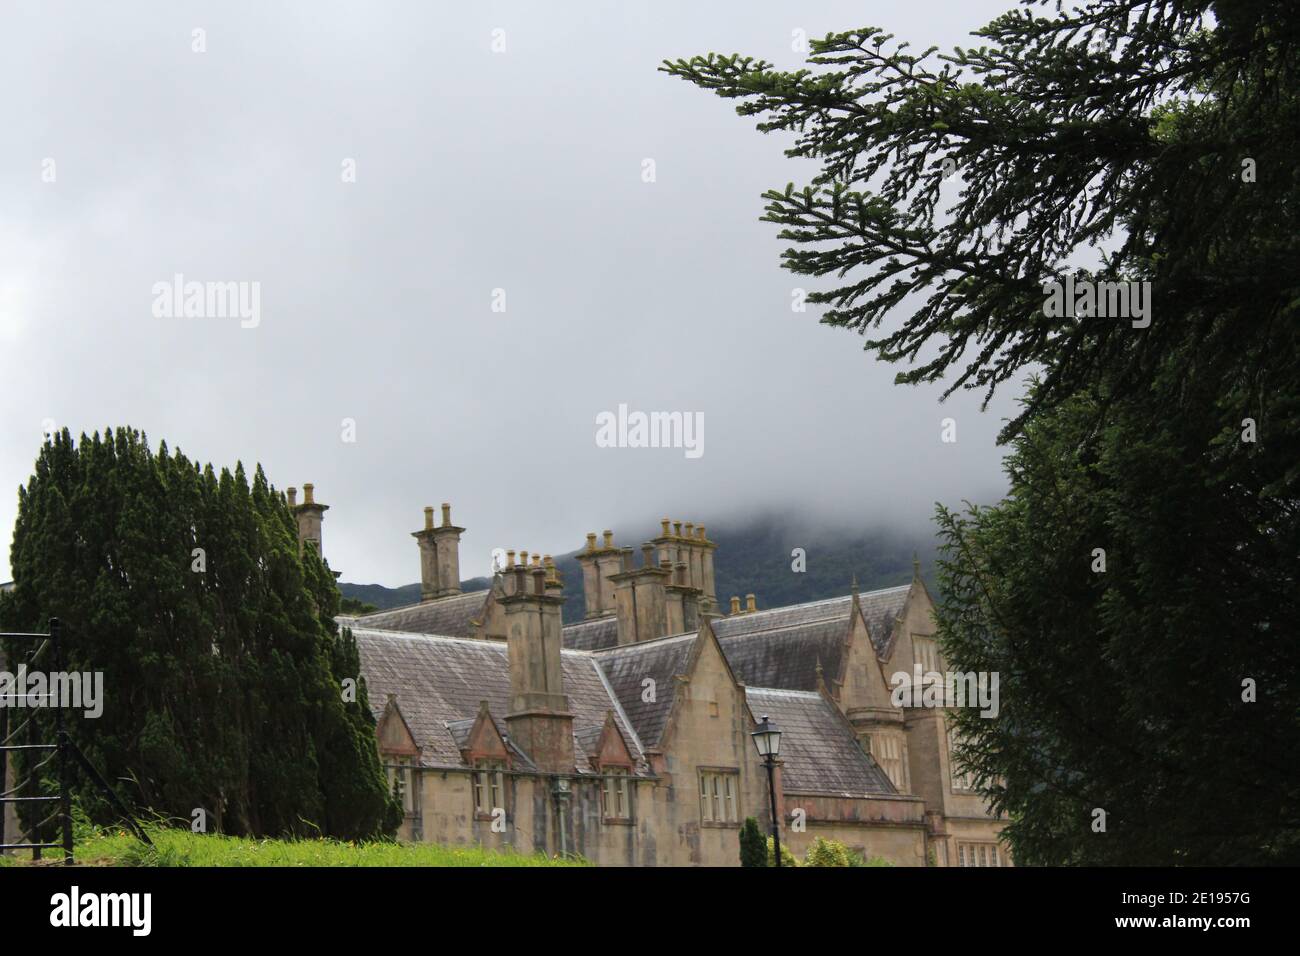 roof of an ancient irish castle under foggy sky Stock Photo